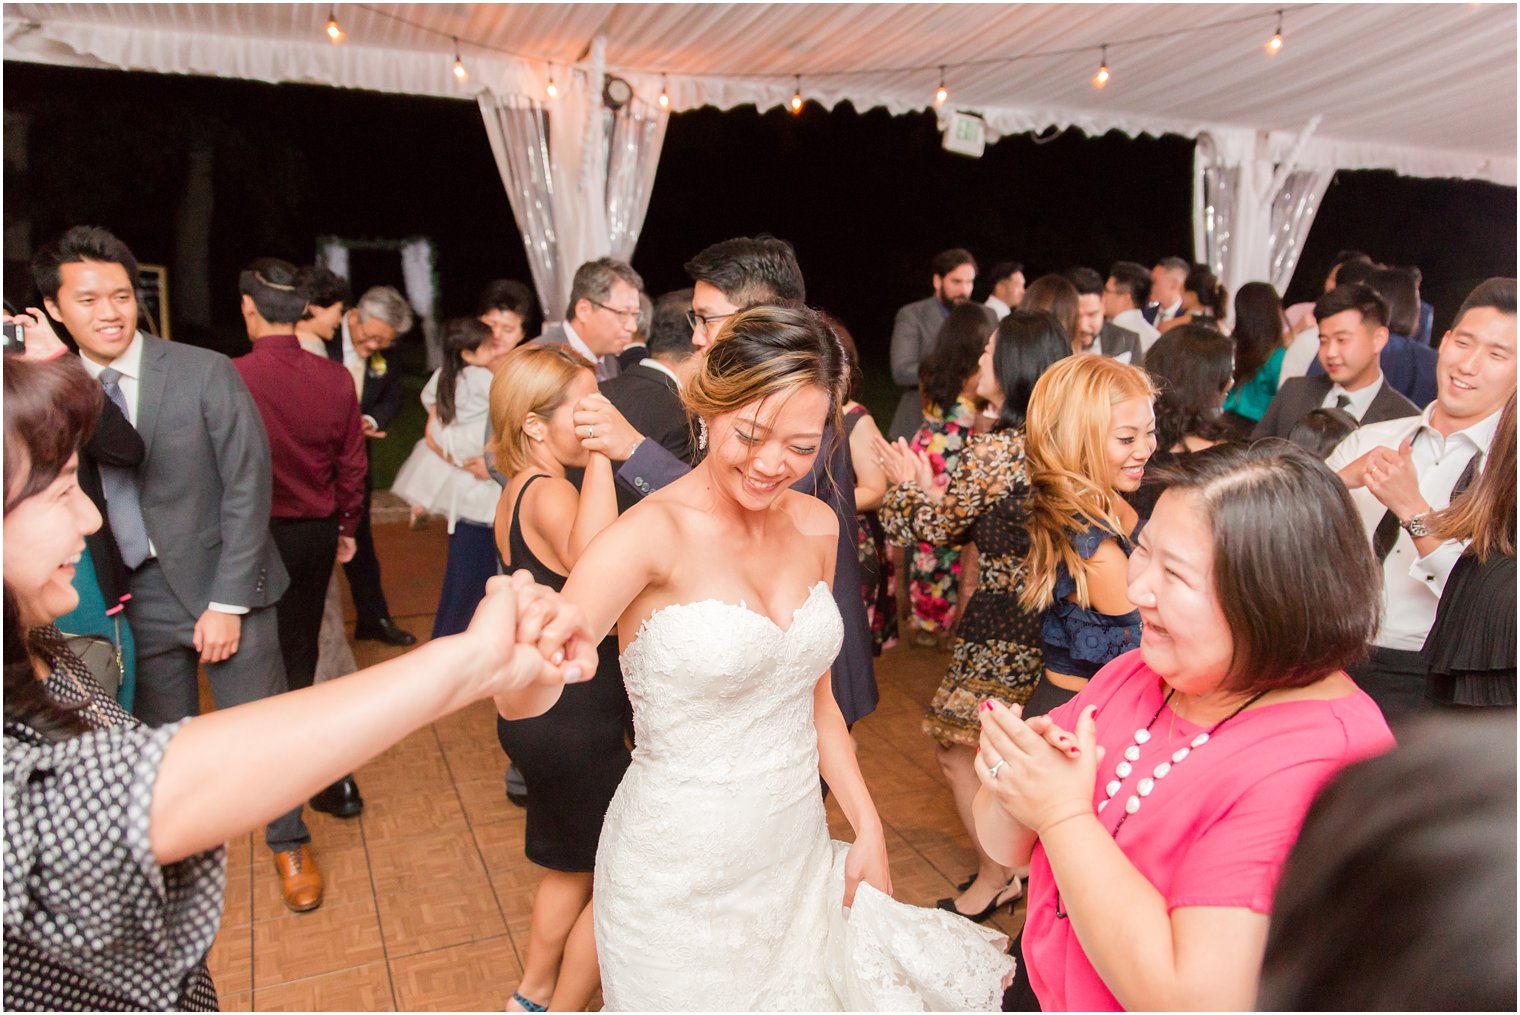 wedding reception dancing at Chauncey Hotel photographed by Idalia Photography